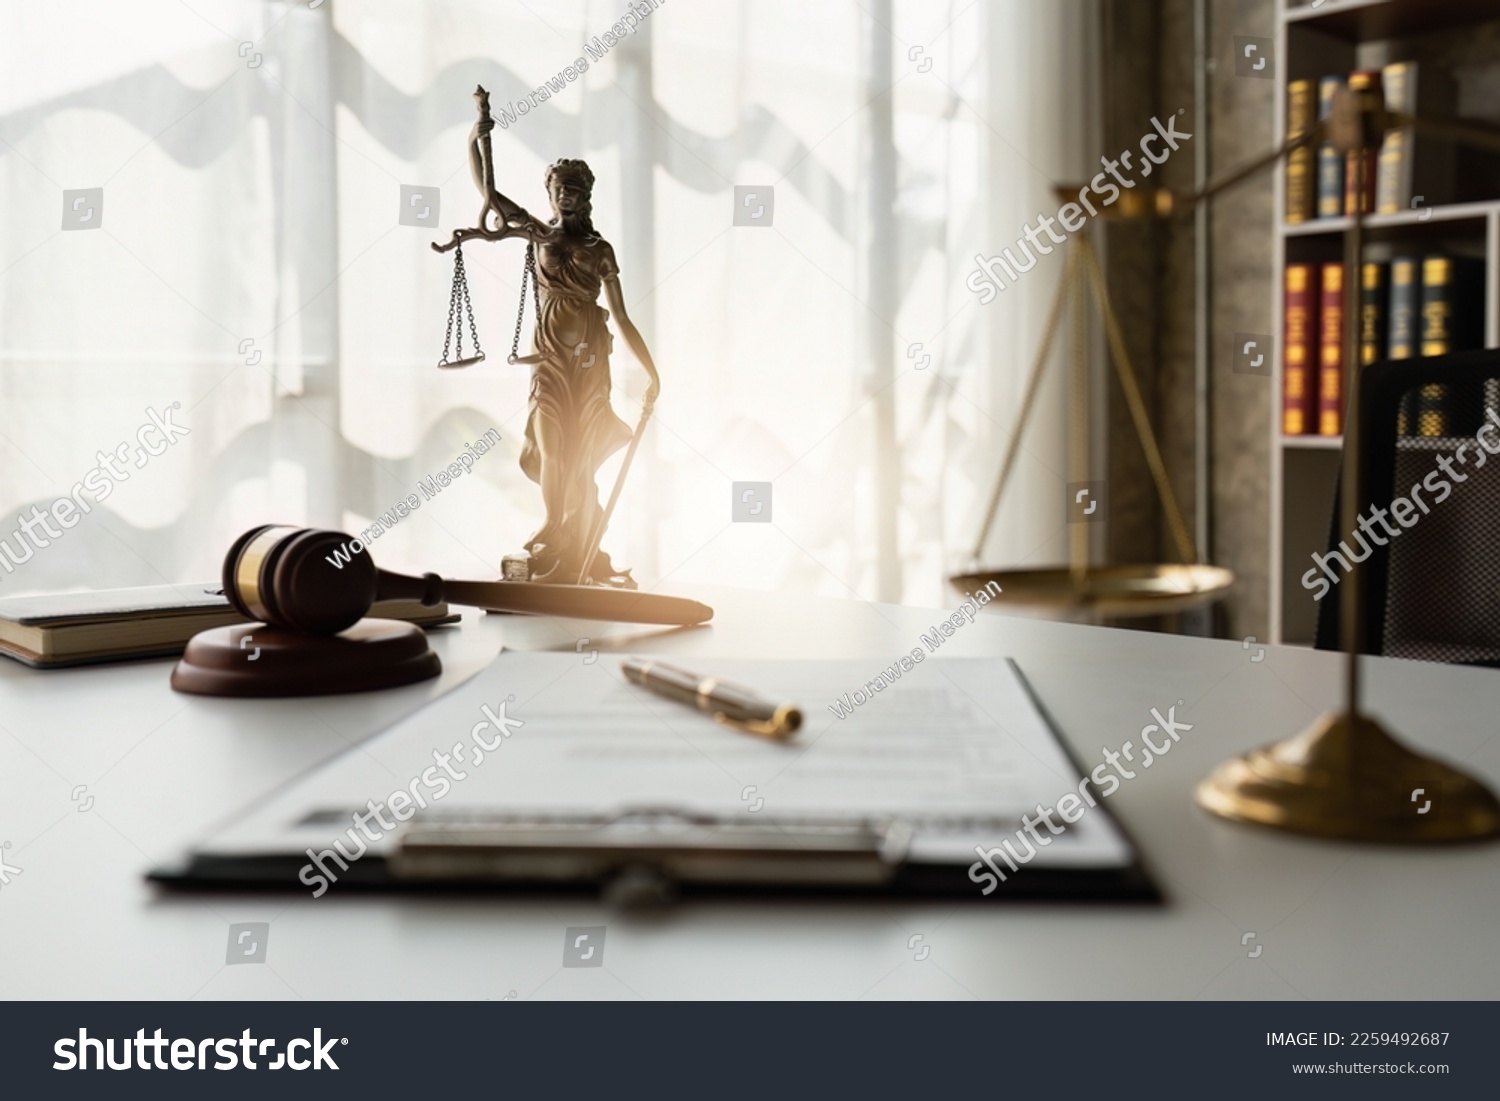 Agreement contract on working desk in office. Law, legal services, advice, Justice concept #2259492687